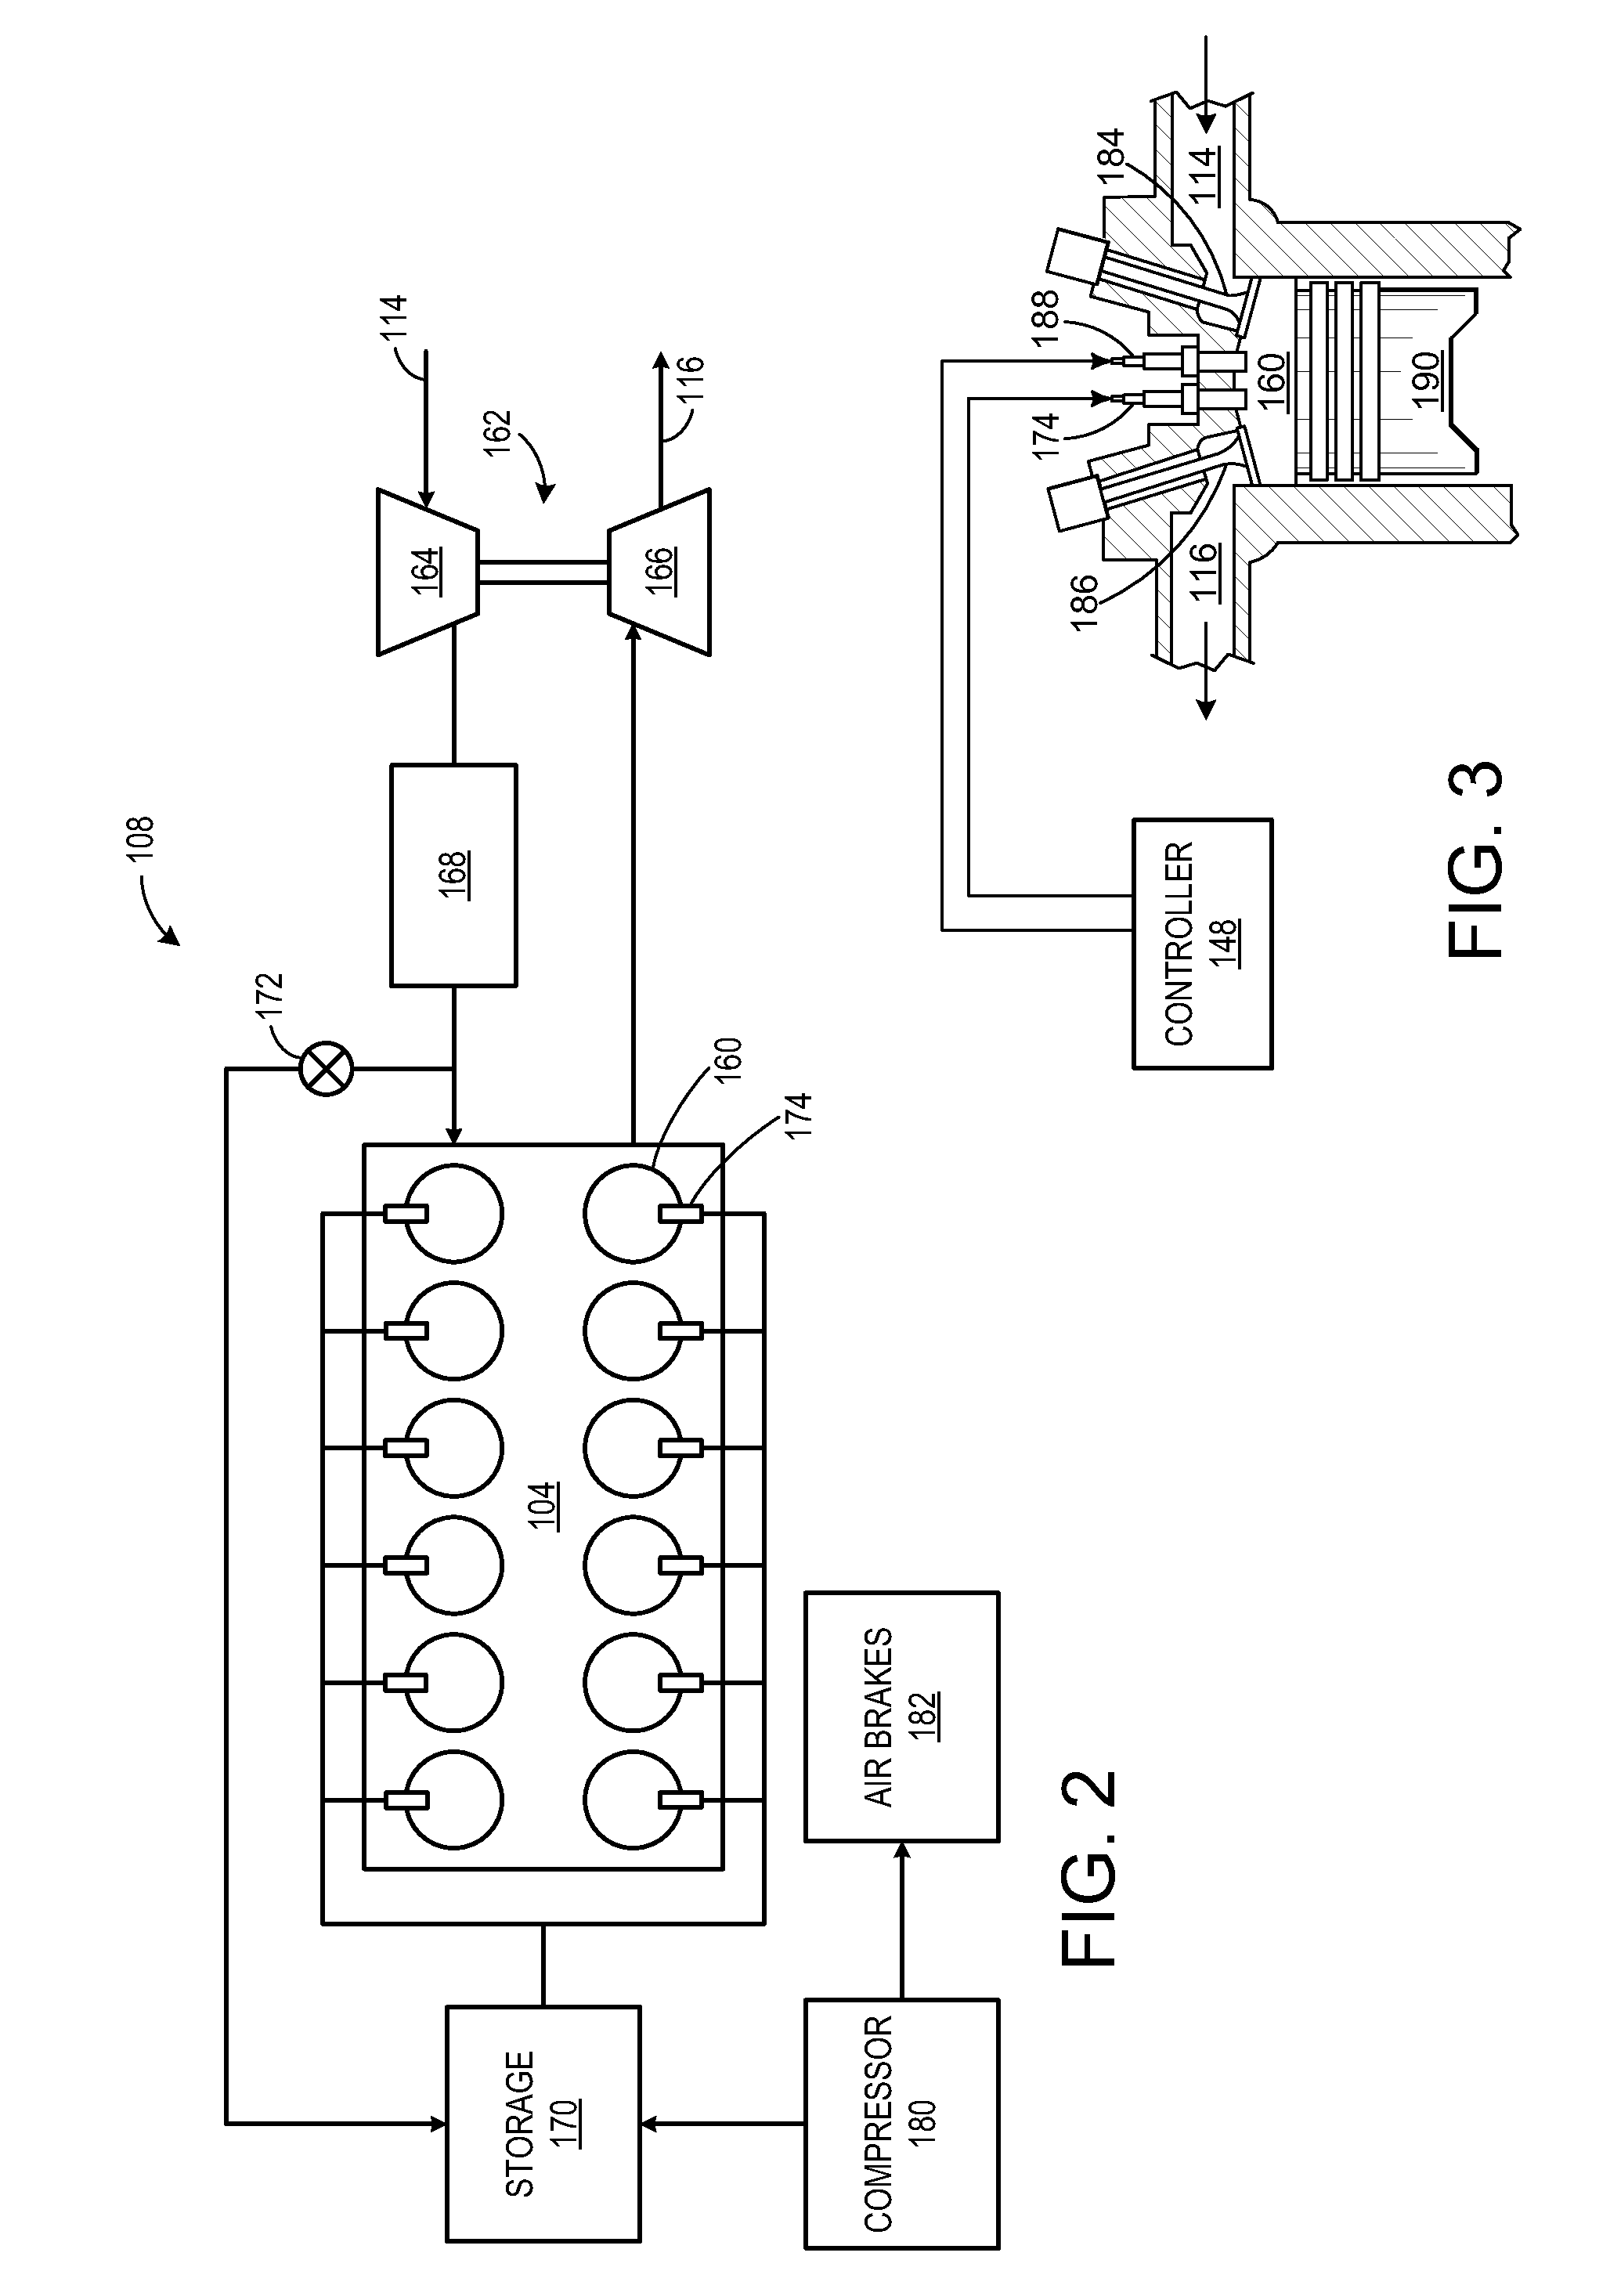 Methods and systems for controlling transient engine response